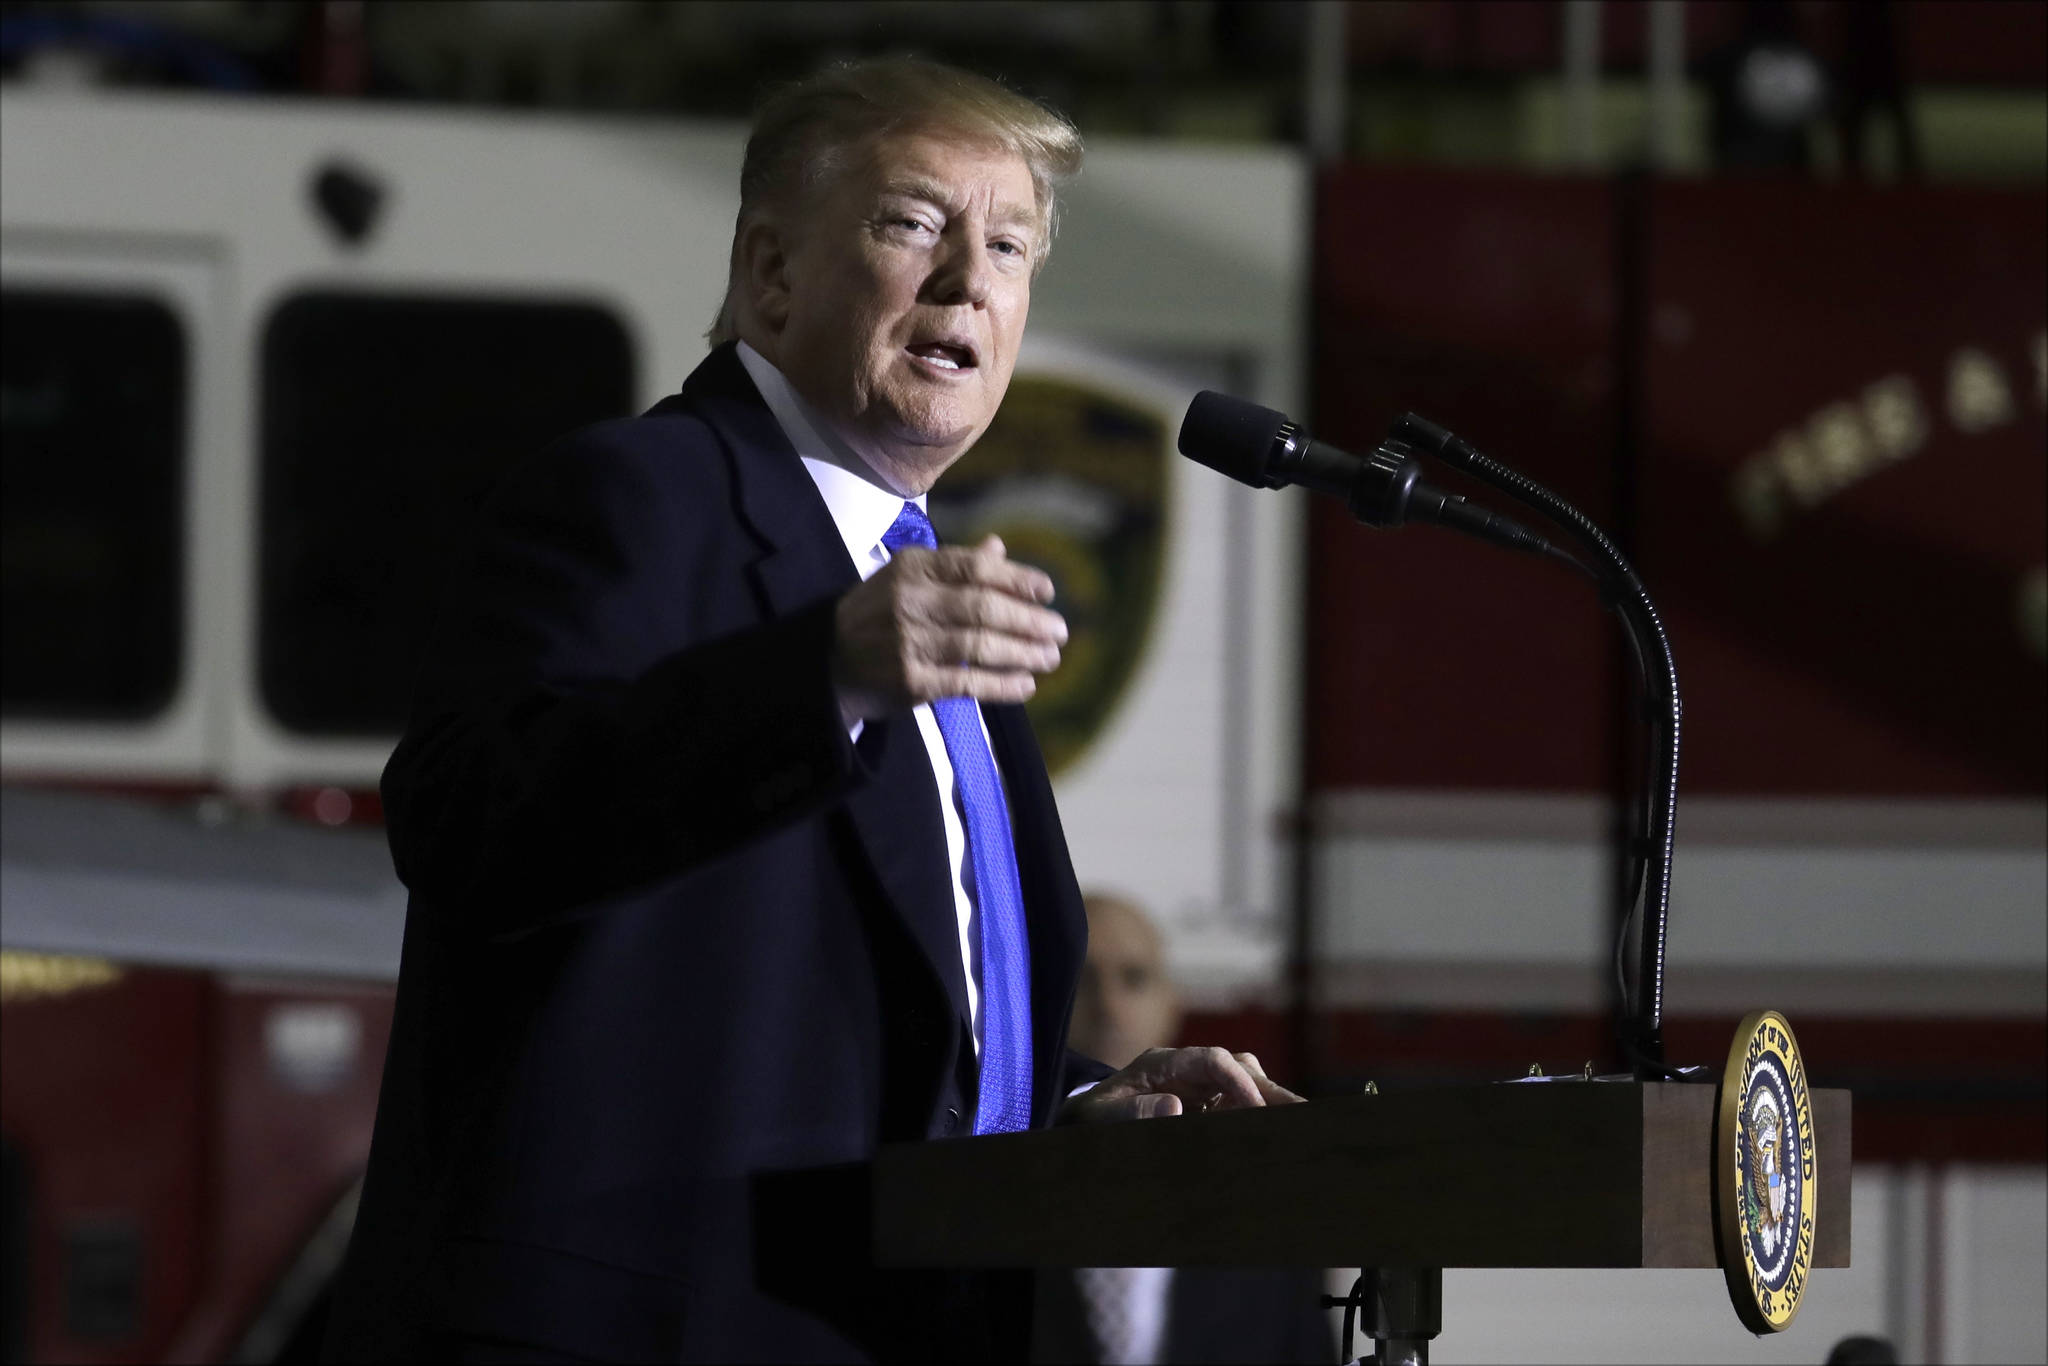 President Donald Trump speaks to service members at Joint Base Elmendorf-Richardson, Thursday, Feb. 28, 2019, in Anchorage, Alaska., during a refueling stop as he returns from Hanoi. (AP Photo/Evan Vucci)